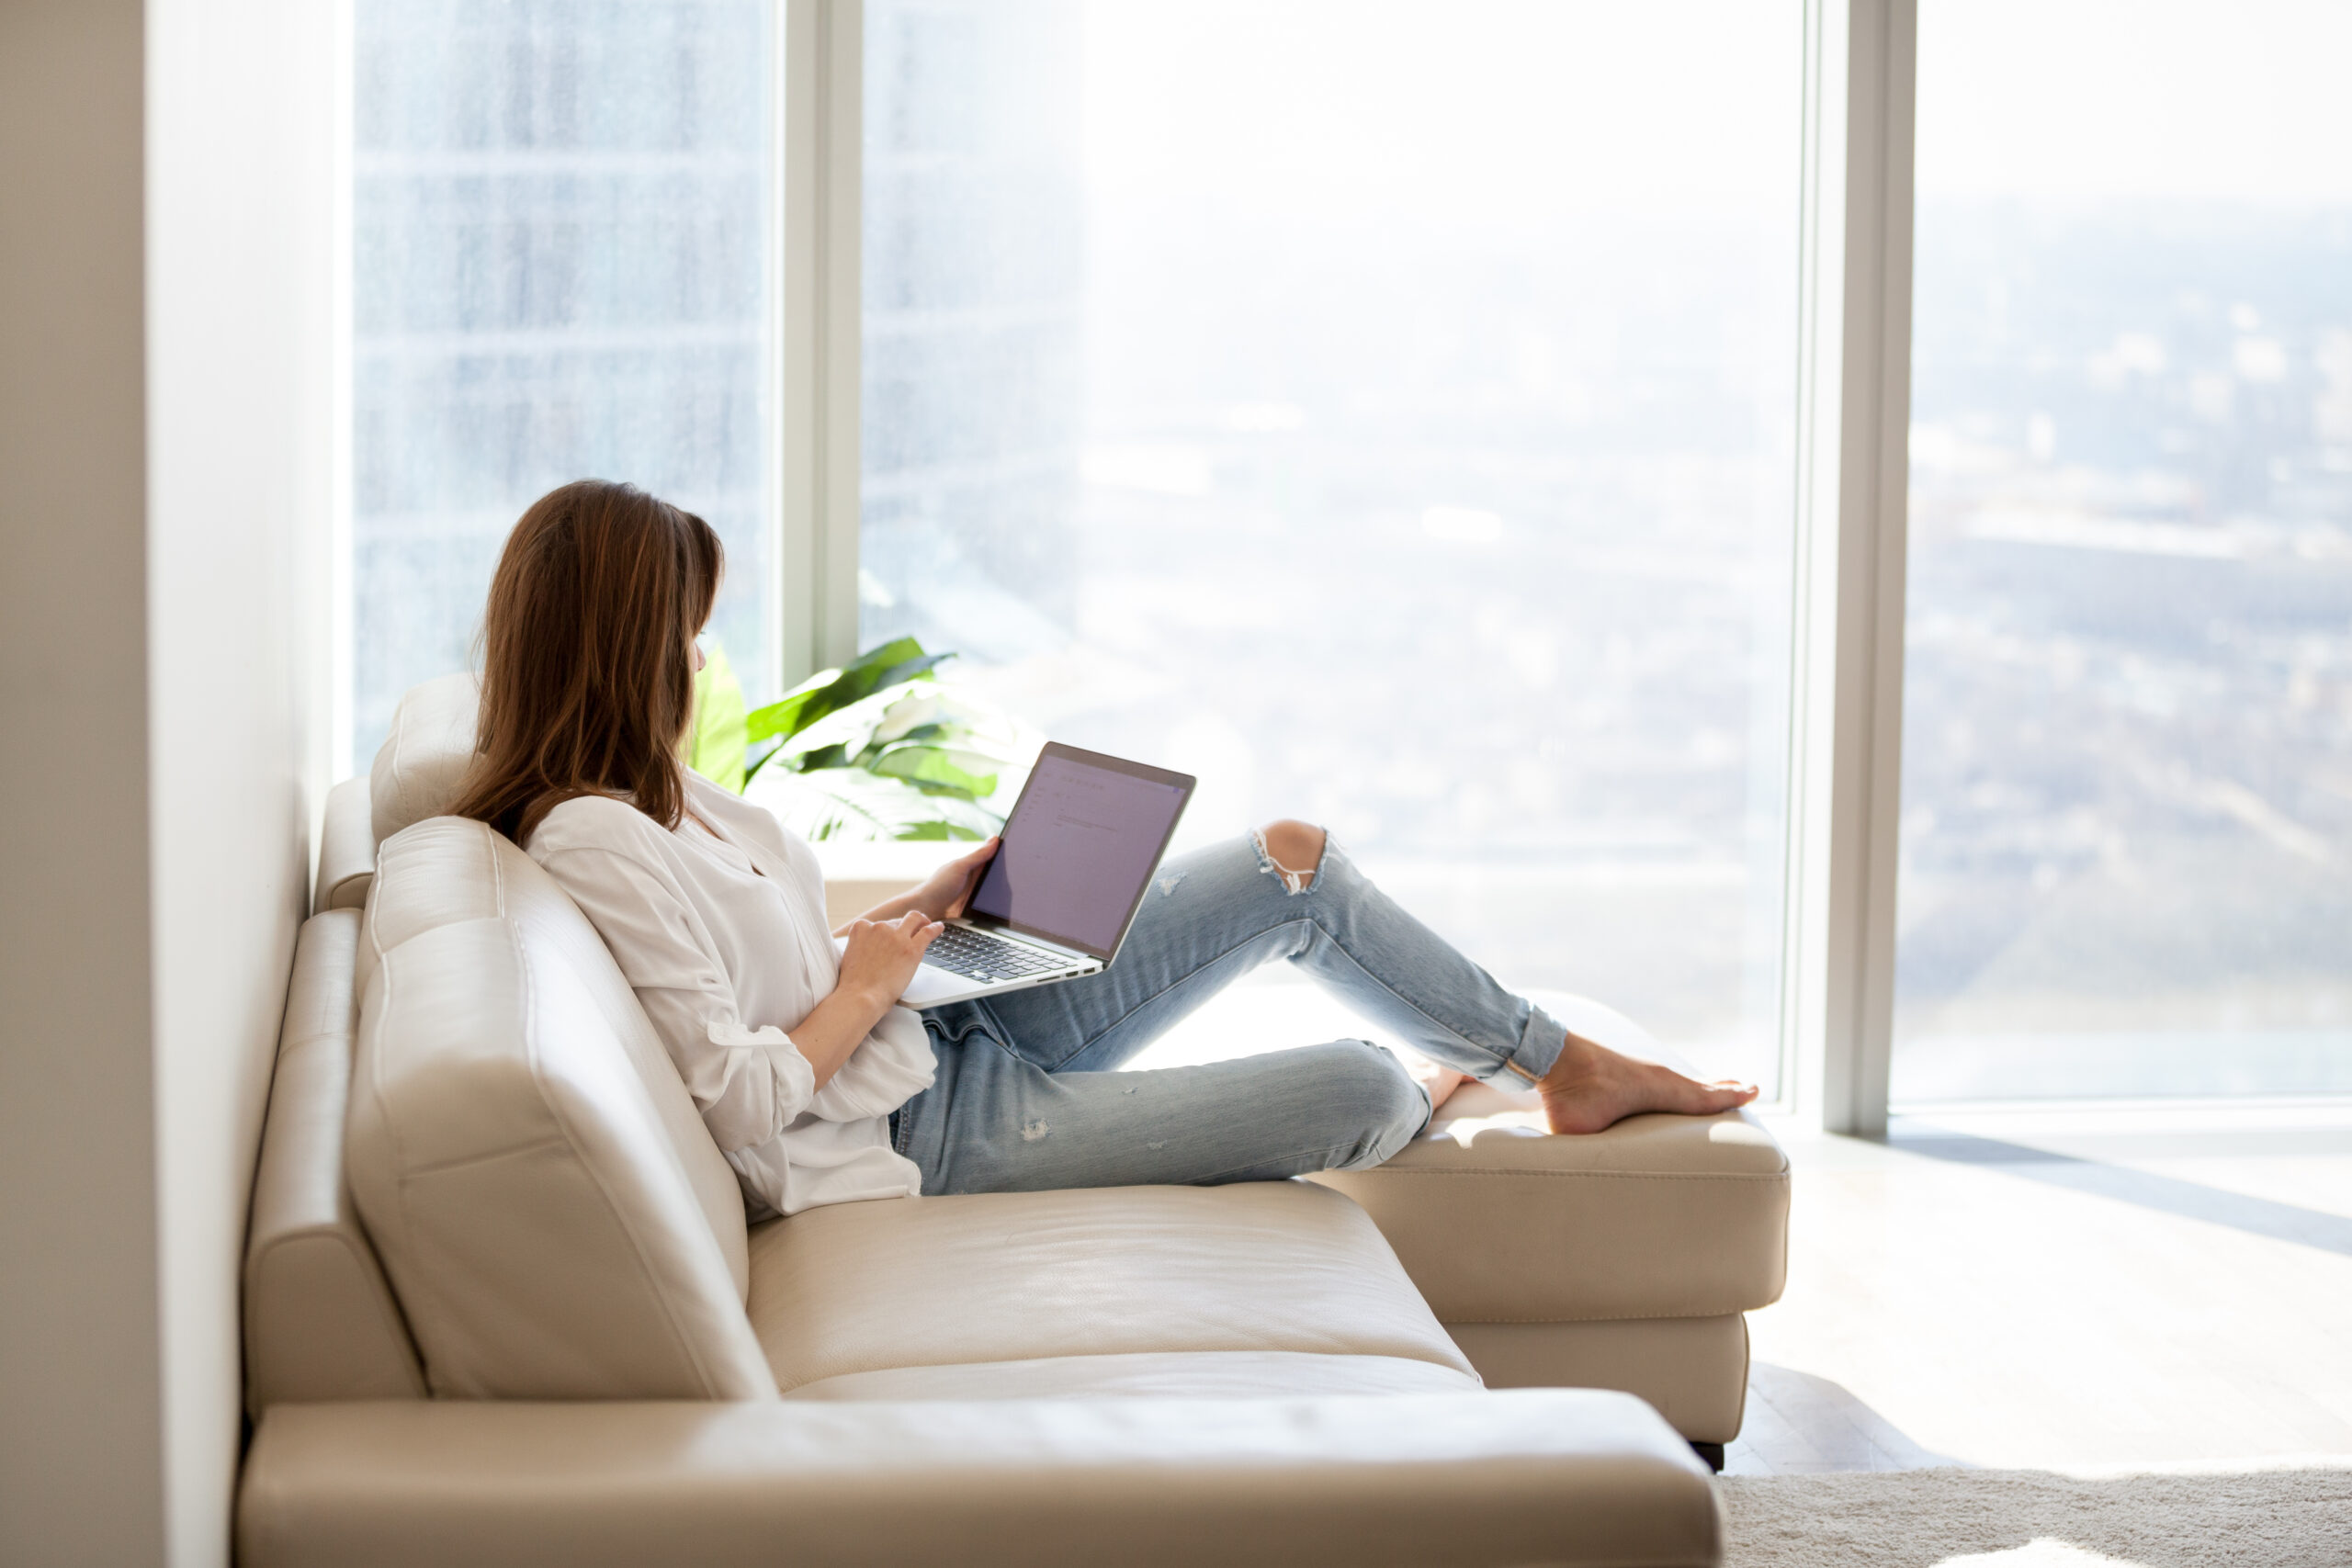 Relaxed,Woman,Using,Laptop,In,Luxury,Home,Living,Room,With